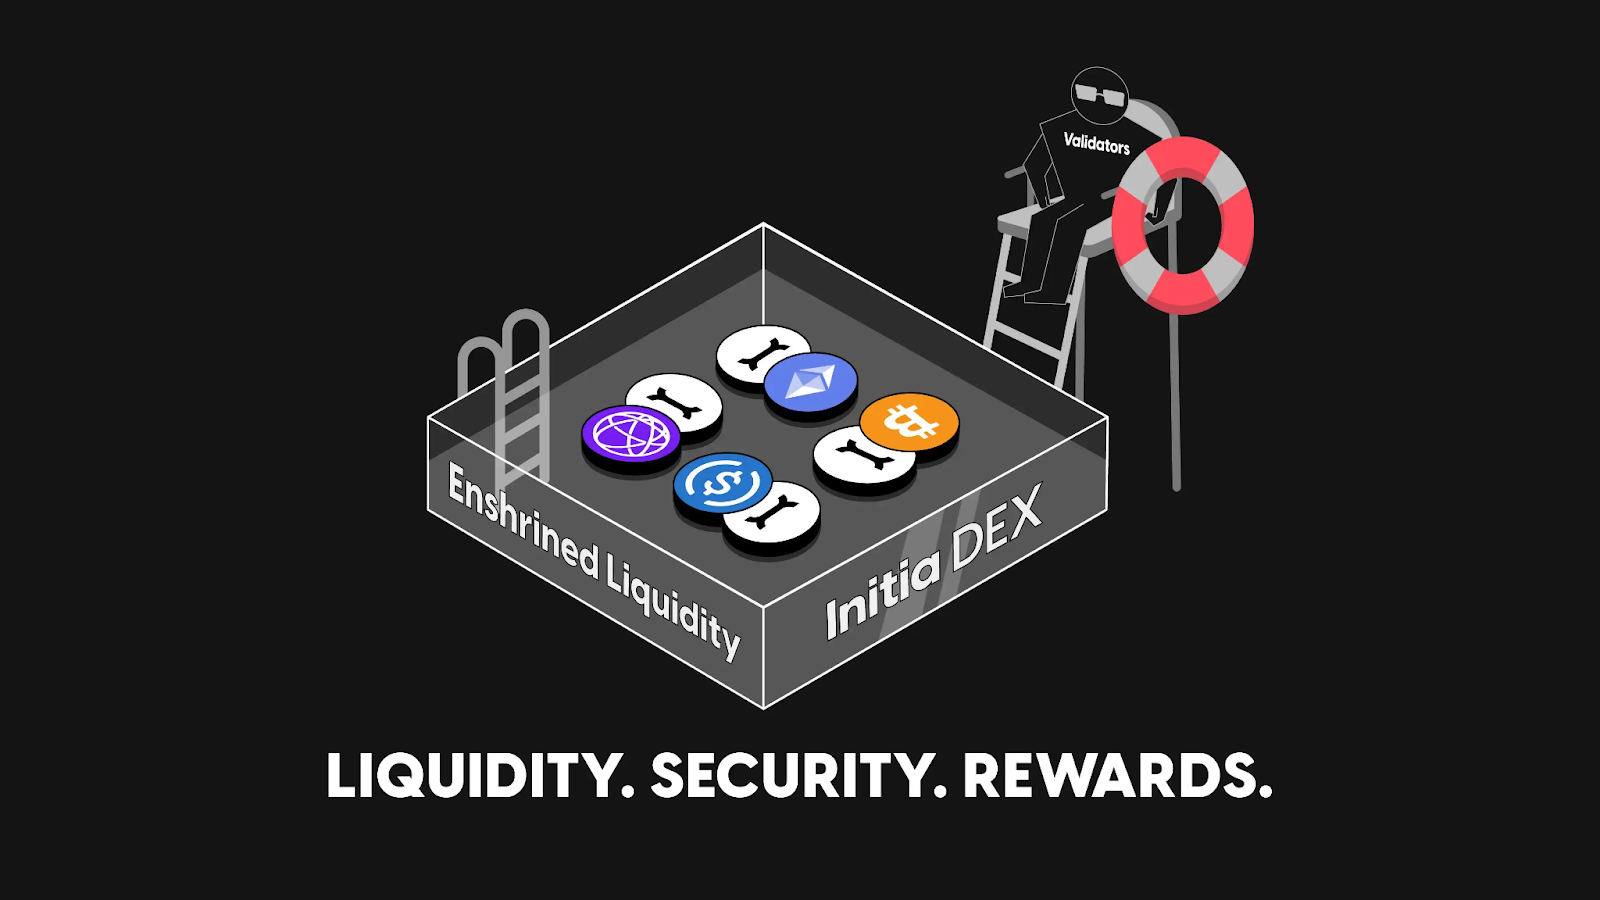 The InitiaDEX and the idea of Enshrined Liquidity, whereby both solo INIT tokens or whitelisted INIT-X LP tokens can be used as stake, are pivotal to the long-term economic efficiency of the Initia project. More users means more adoption. Therefore, where users go, liquidity flows. (Image Credit: Initia: Modular Rollup integration Layer 1 built by former LUNA employees via Blockbeats)